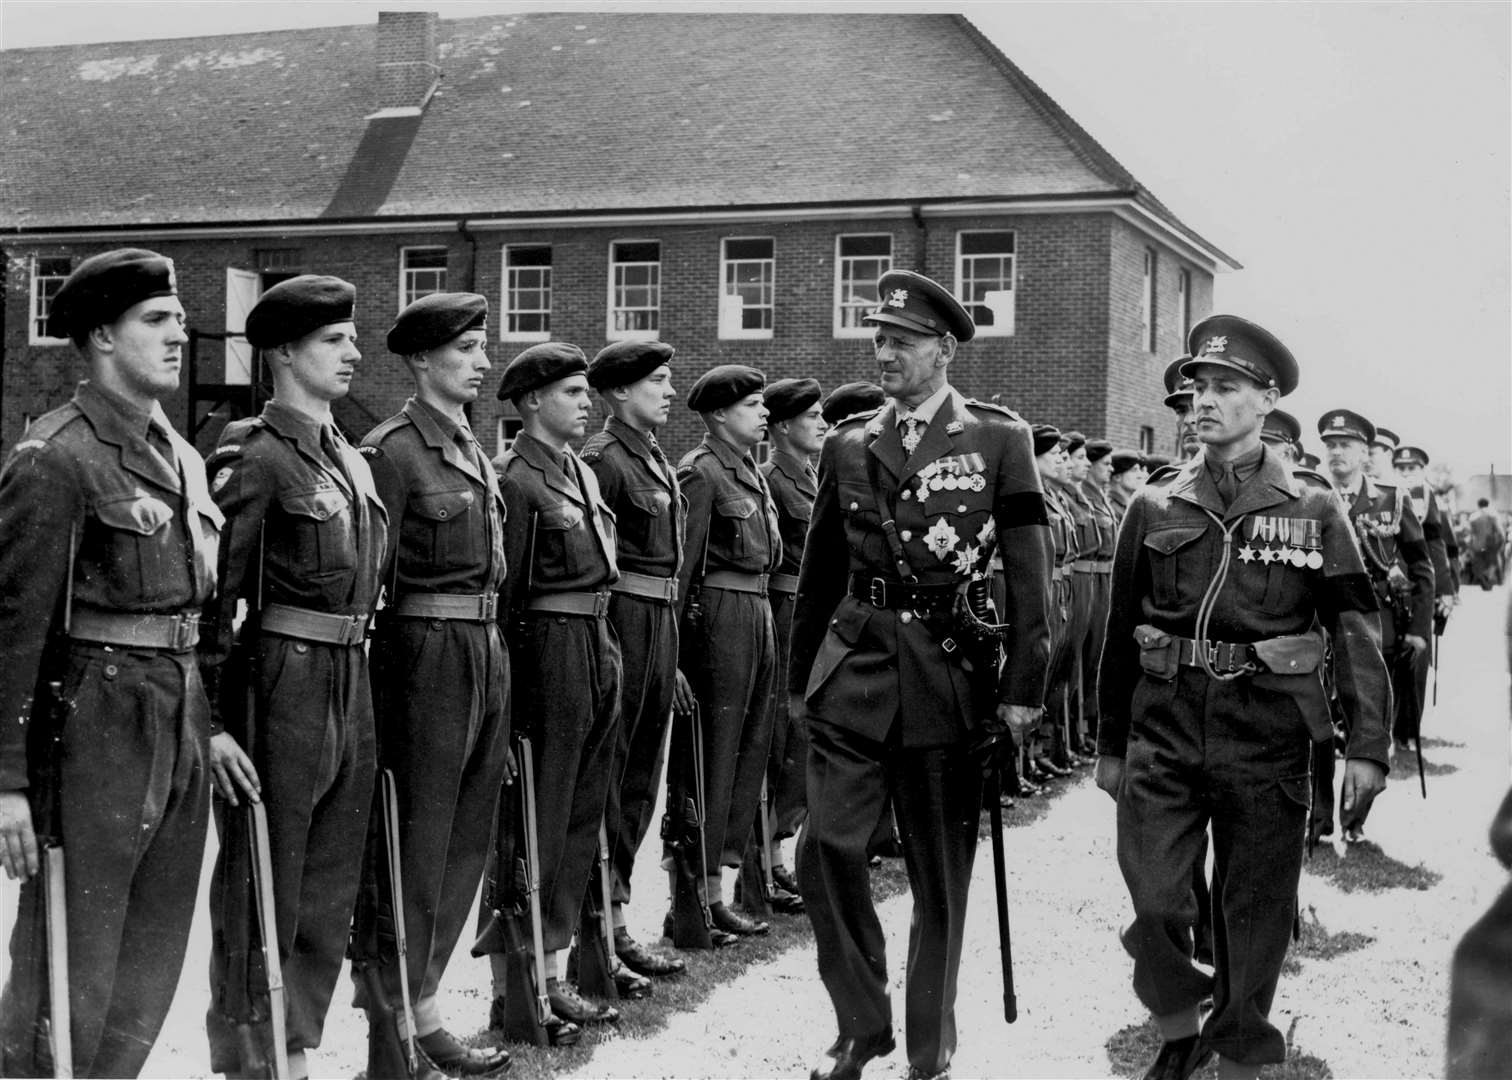 The King of Denmark inspecting troops at Martin's Hill, Canterbury, May 1952. Picture from the Images of Canterbury KM book